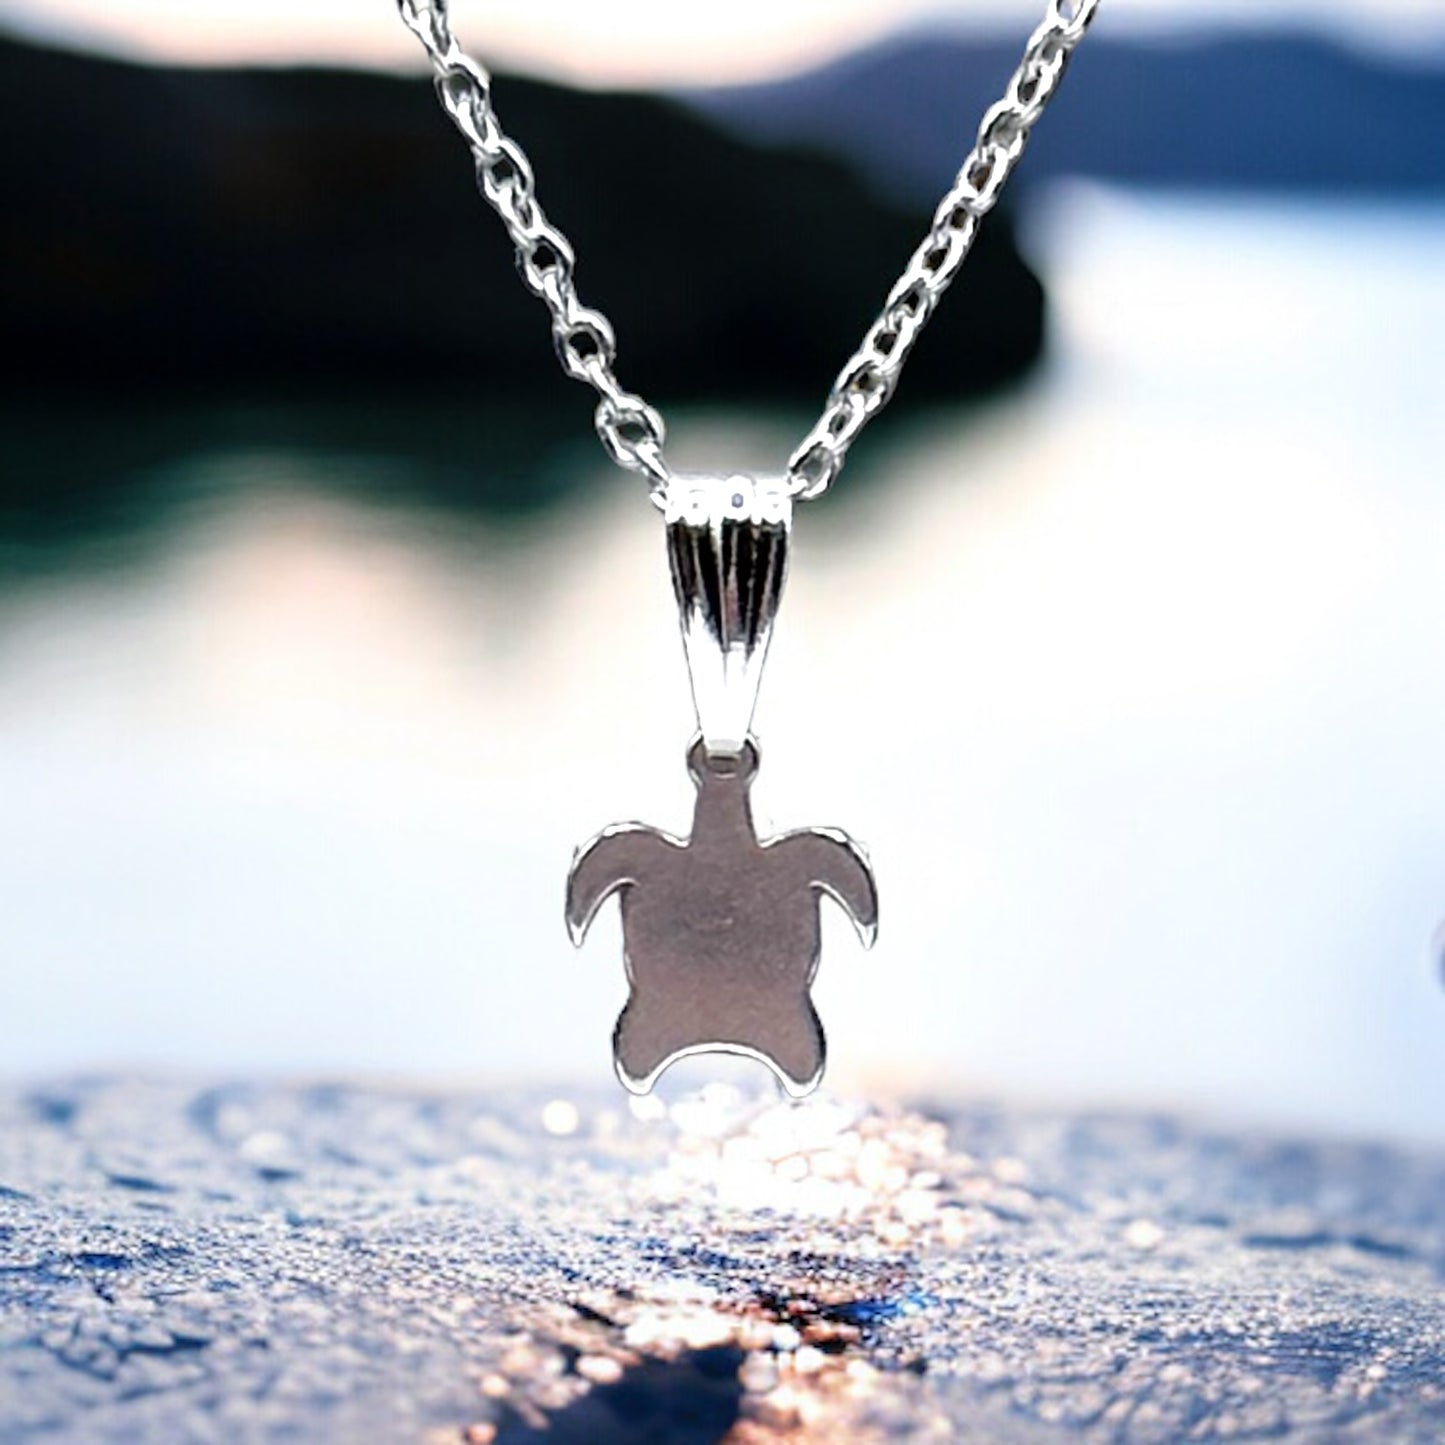 Stainless Steel Turtle Charm Necklace